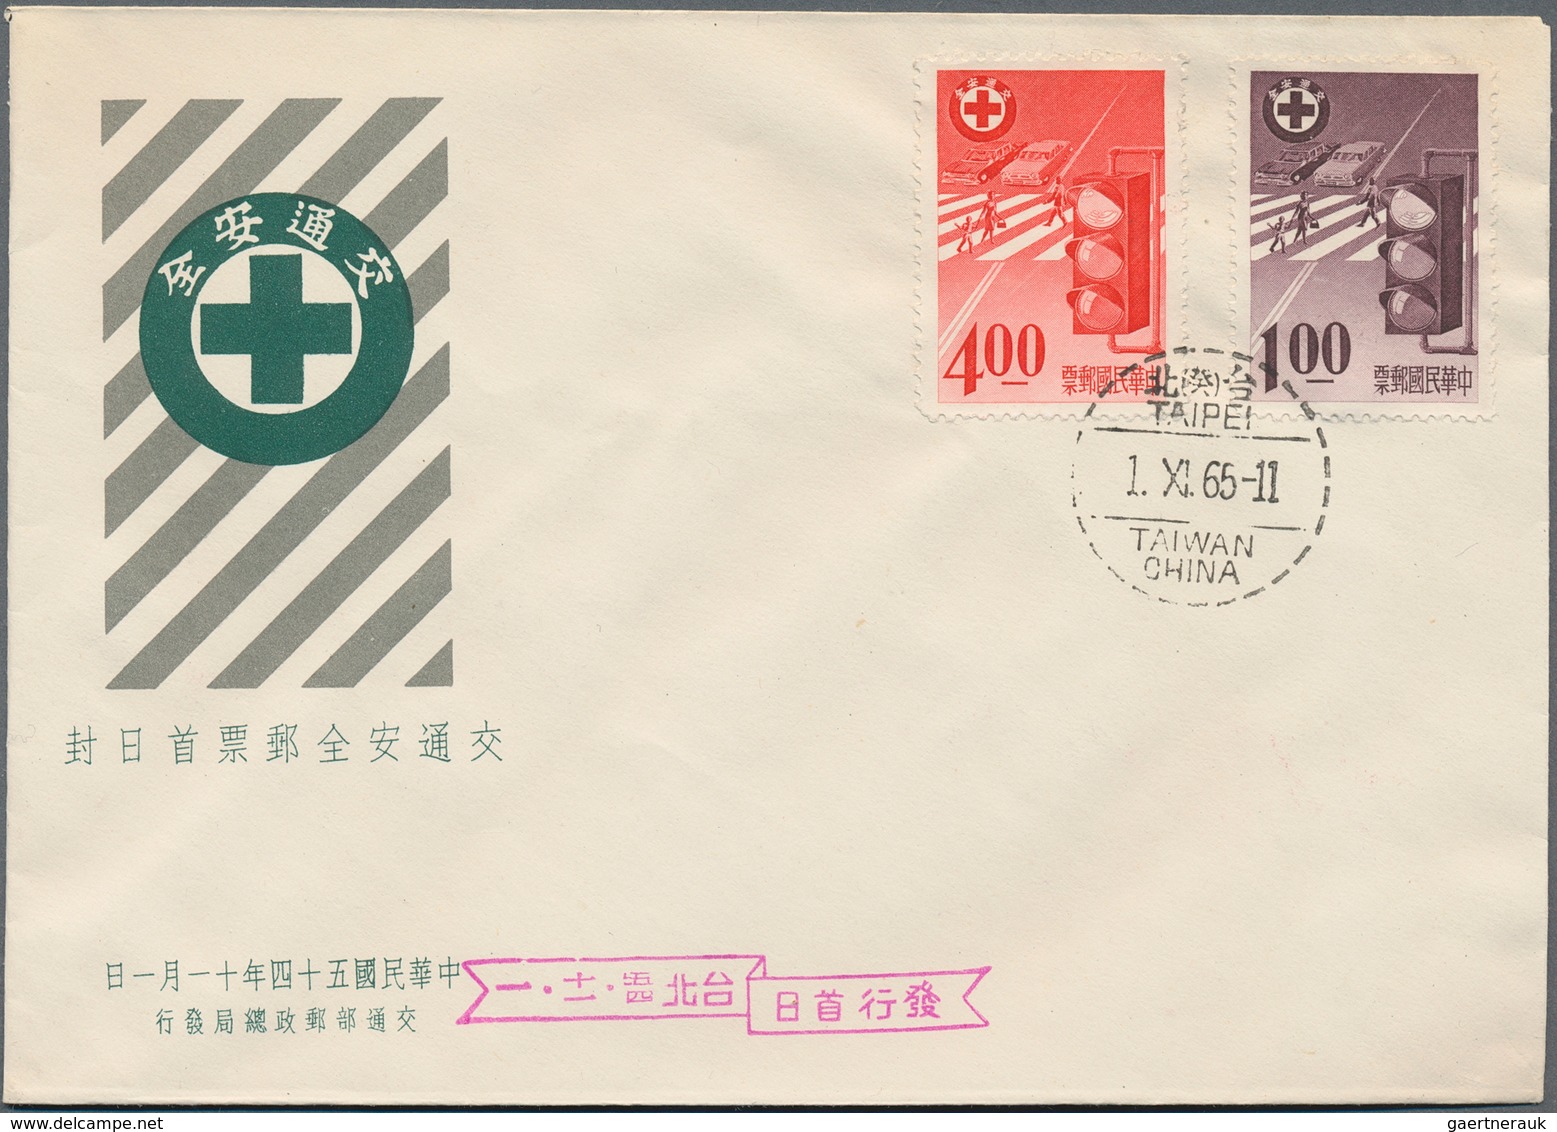 China: 1927/86, 72 (ca.) covers and cards, as well as 4 stamp folders in box, including a number of